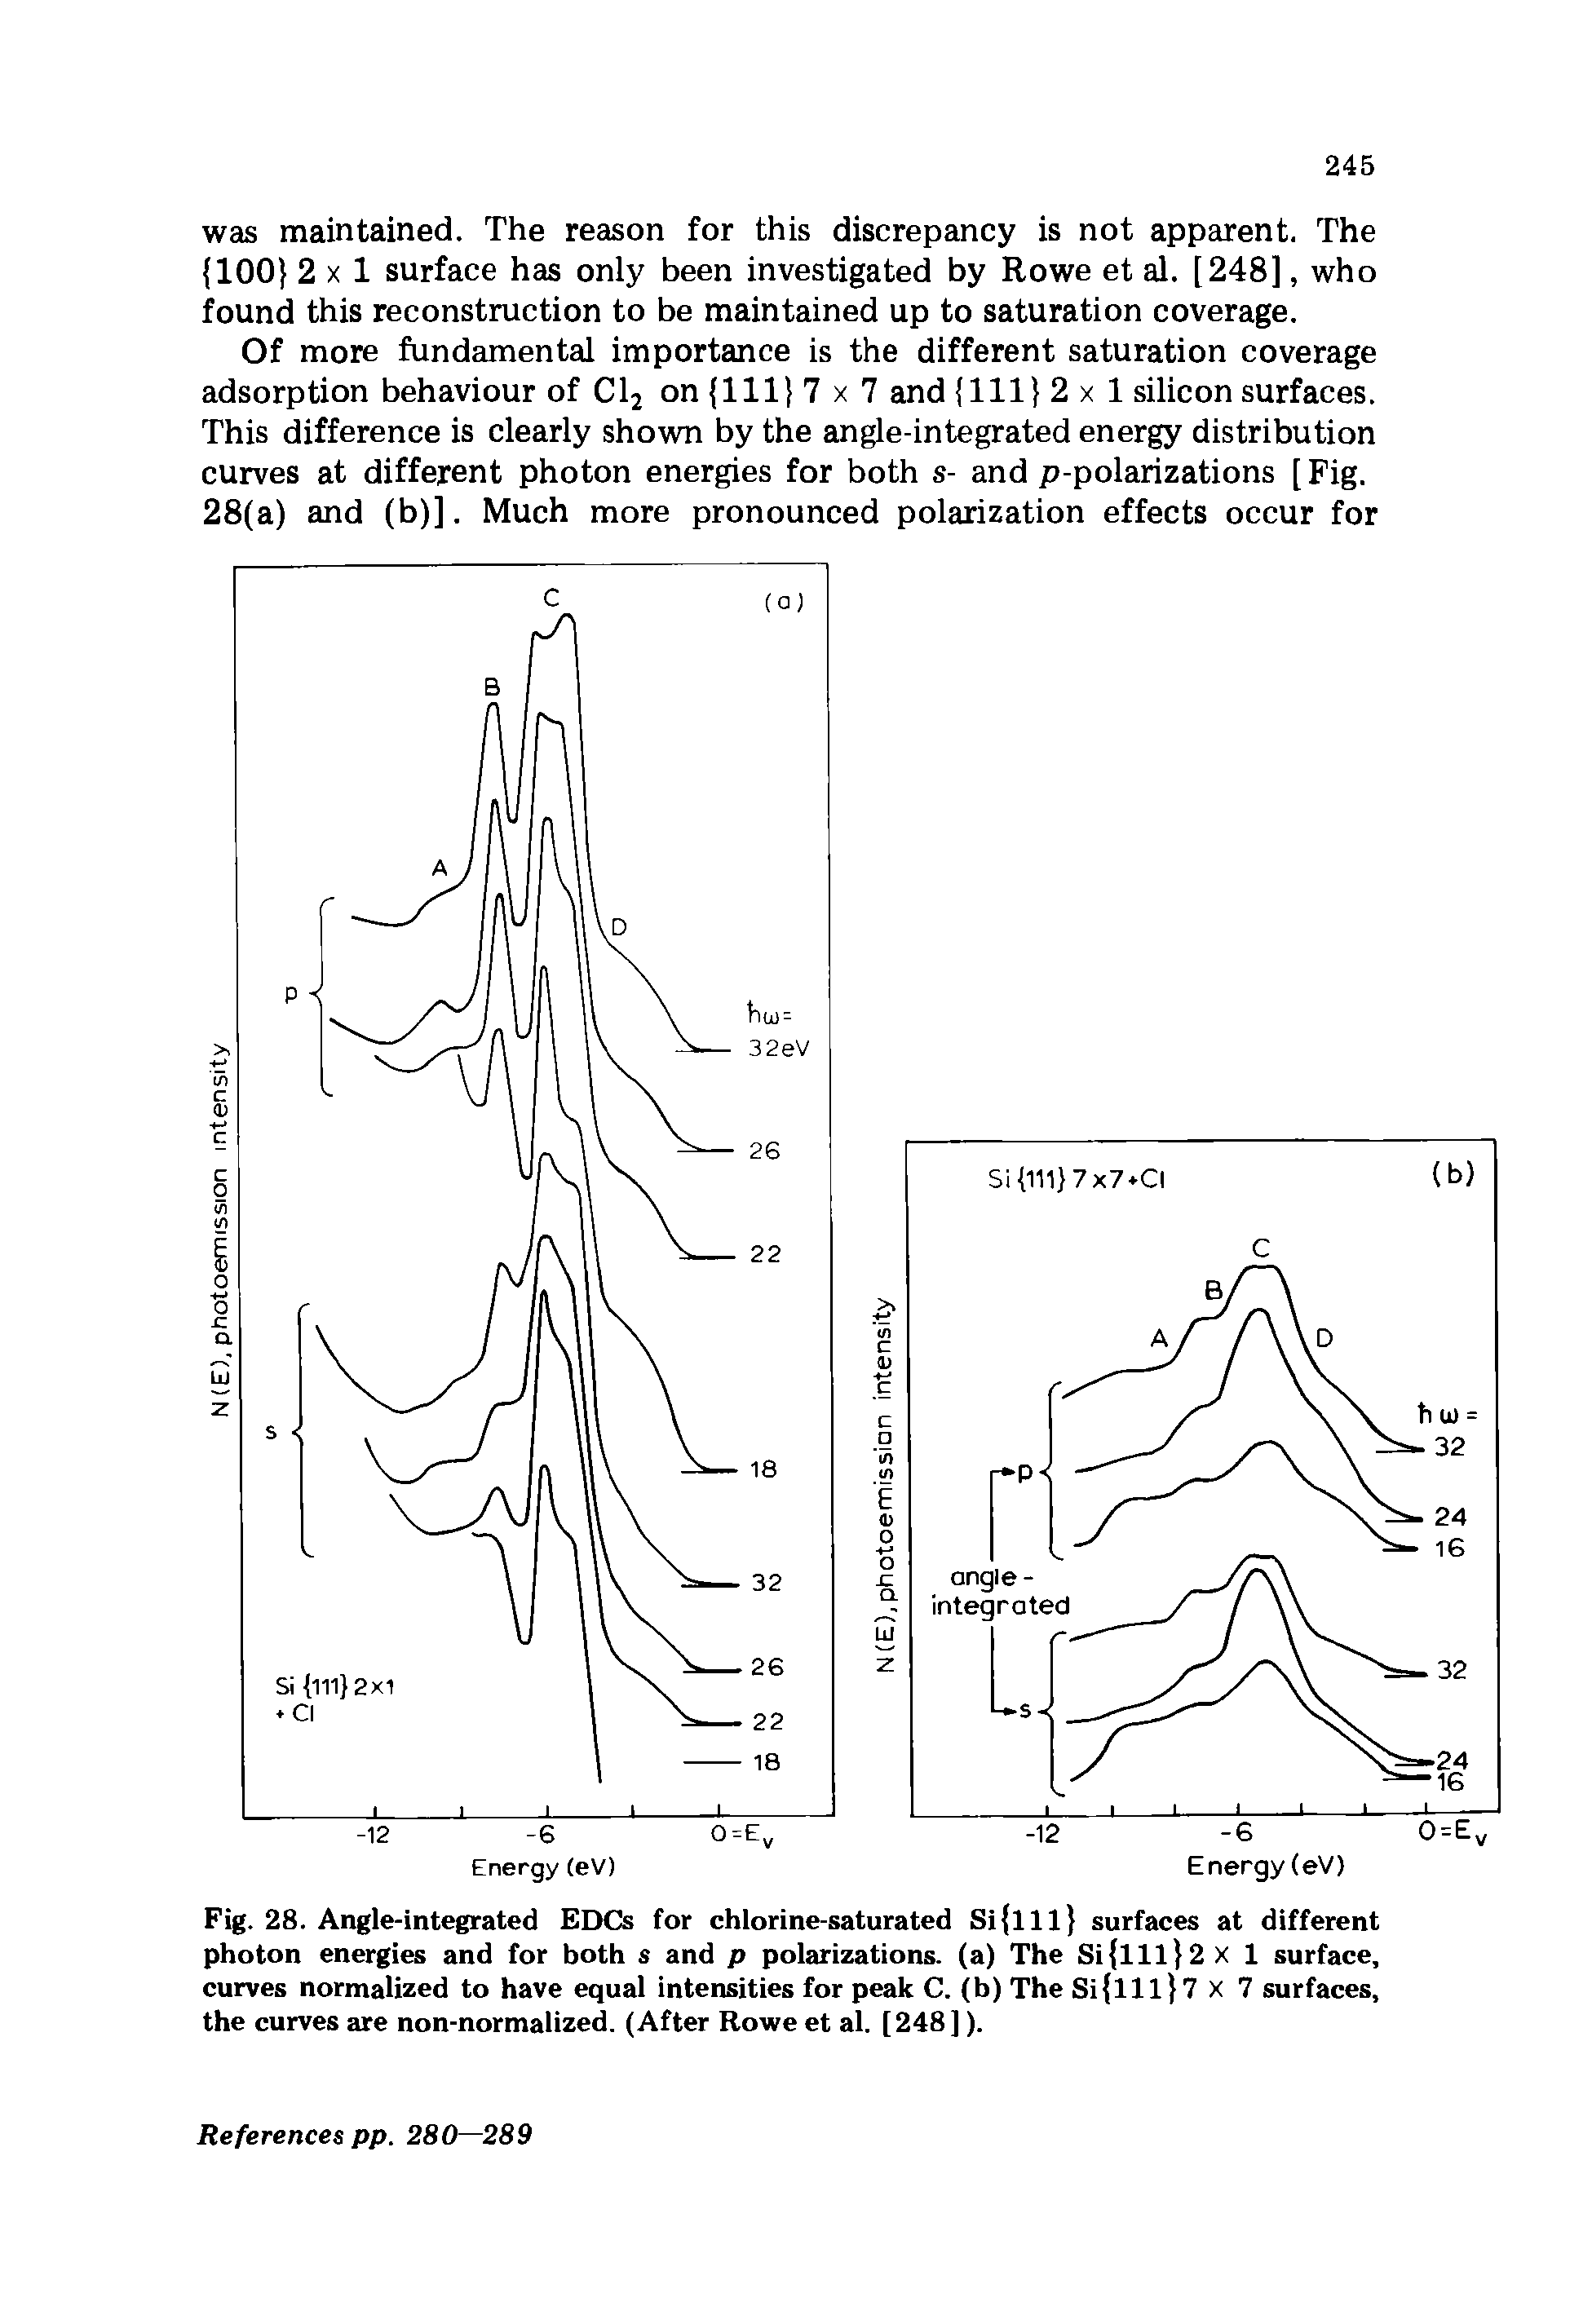 Fig. 28. Angle-integrated EDCs for chlorine-saturated Si ill surfaces at different photon energies and for both s and p polarizations, (a) The Si lll 2x 1 surface, curves normalized to have equal intensities for peak C. (b) The Si lll 7 X 7 surfaces, the curves are non-normalized. (After Rowe et al. [248]).